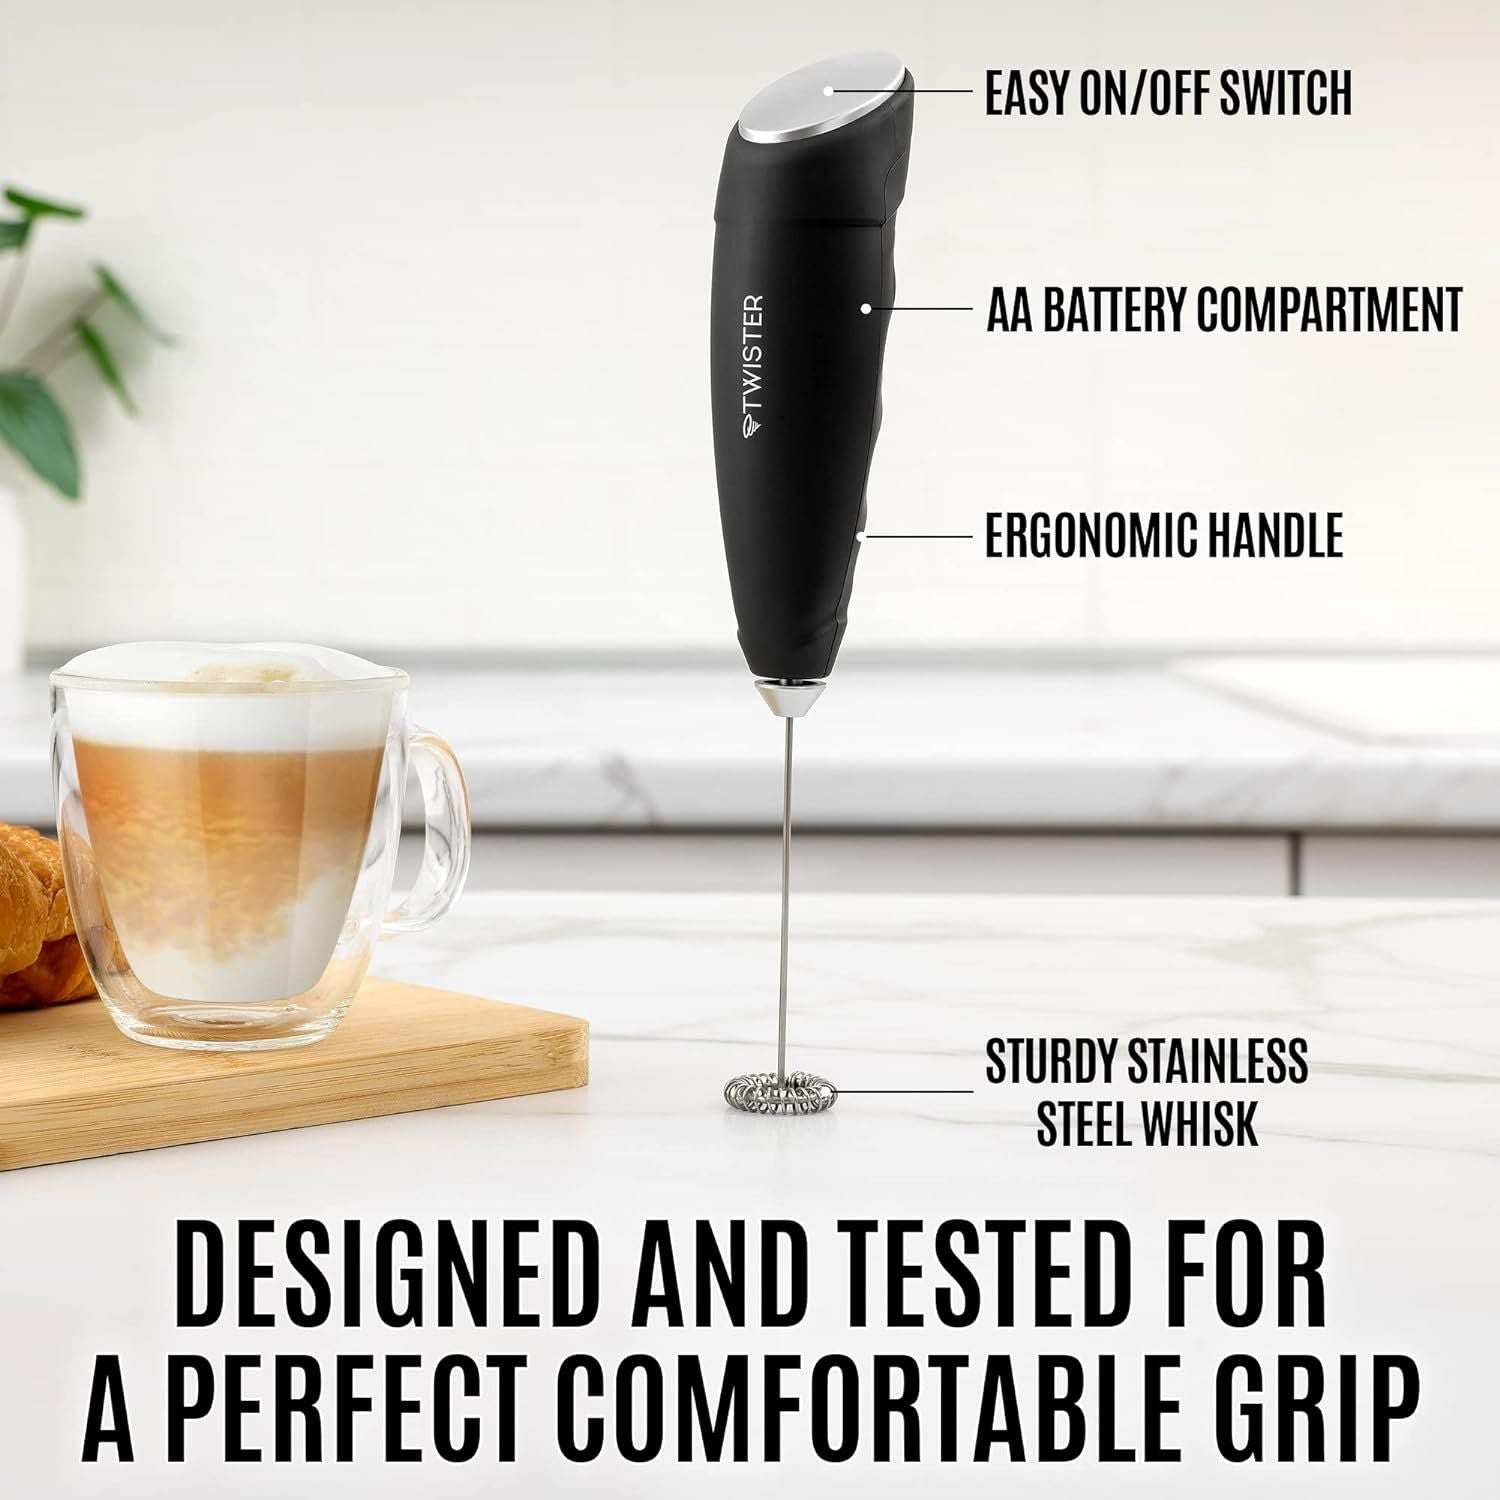 this Twister Milk Frother is designed and tested for comfortable grip